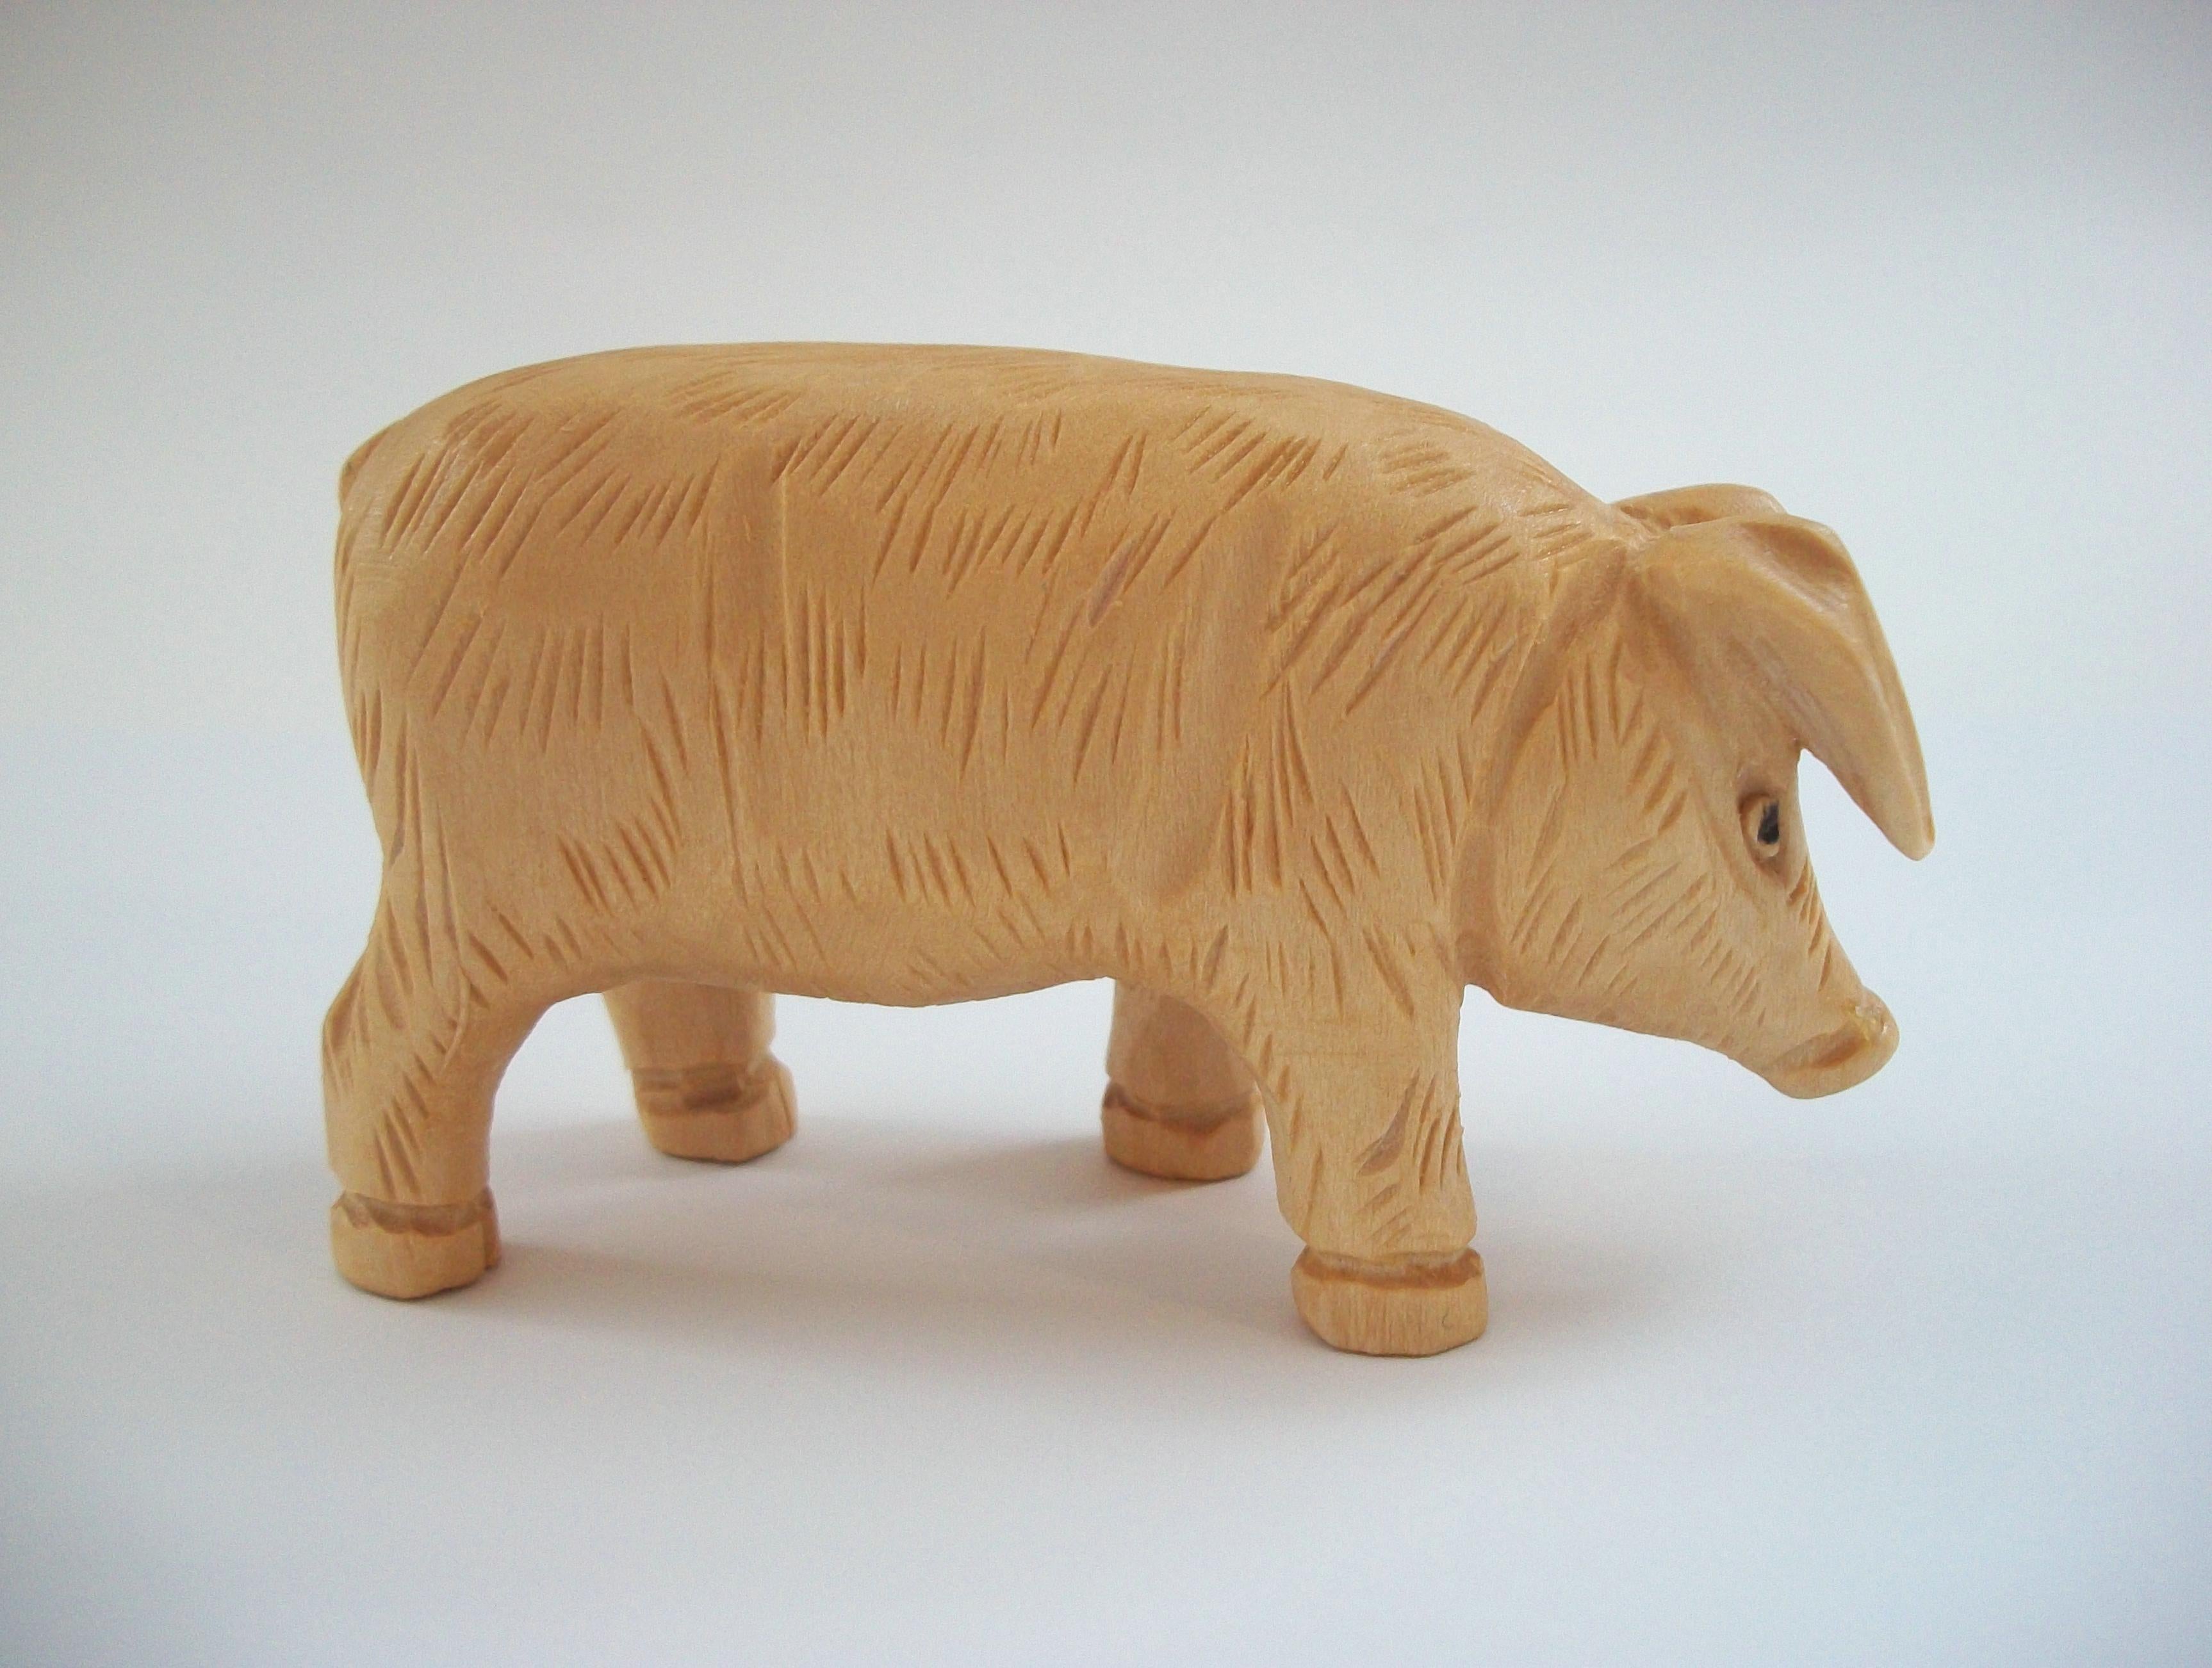 Hand-Carved NOËL GUAY - Vintage Folk Art Pine Pig Sculpture - Canada - Late 20th Century For Sale